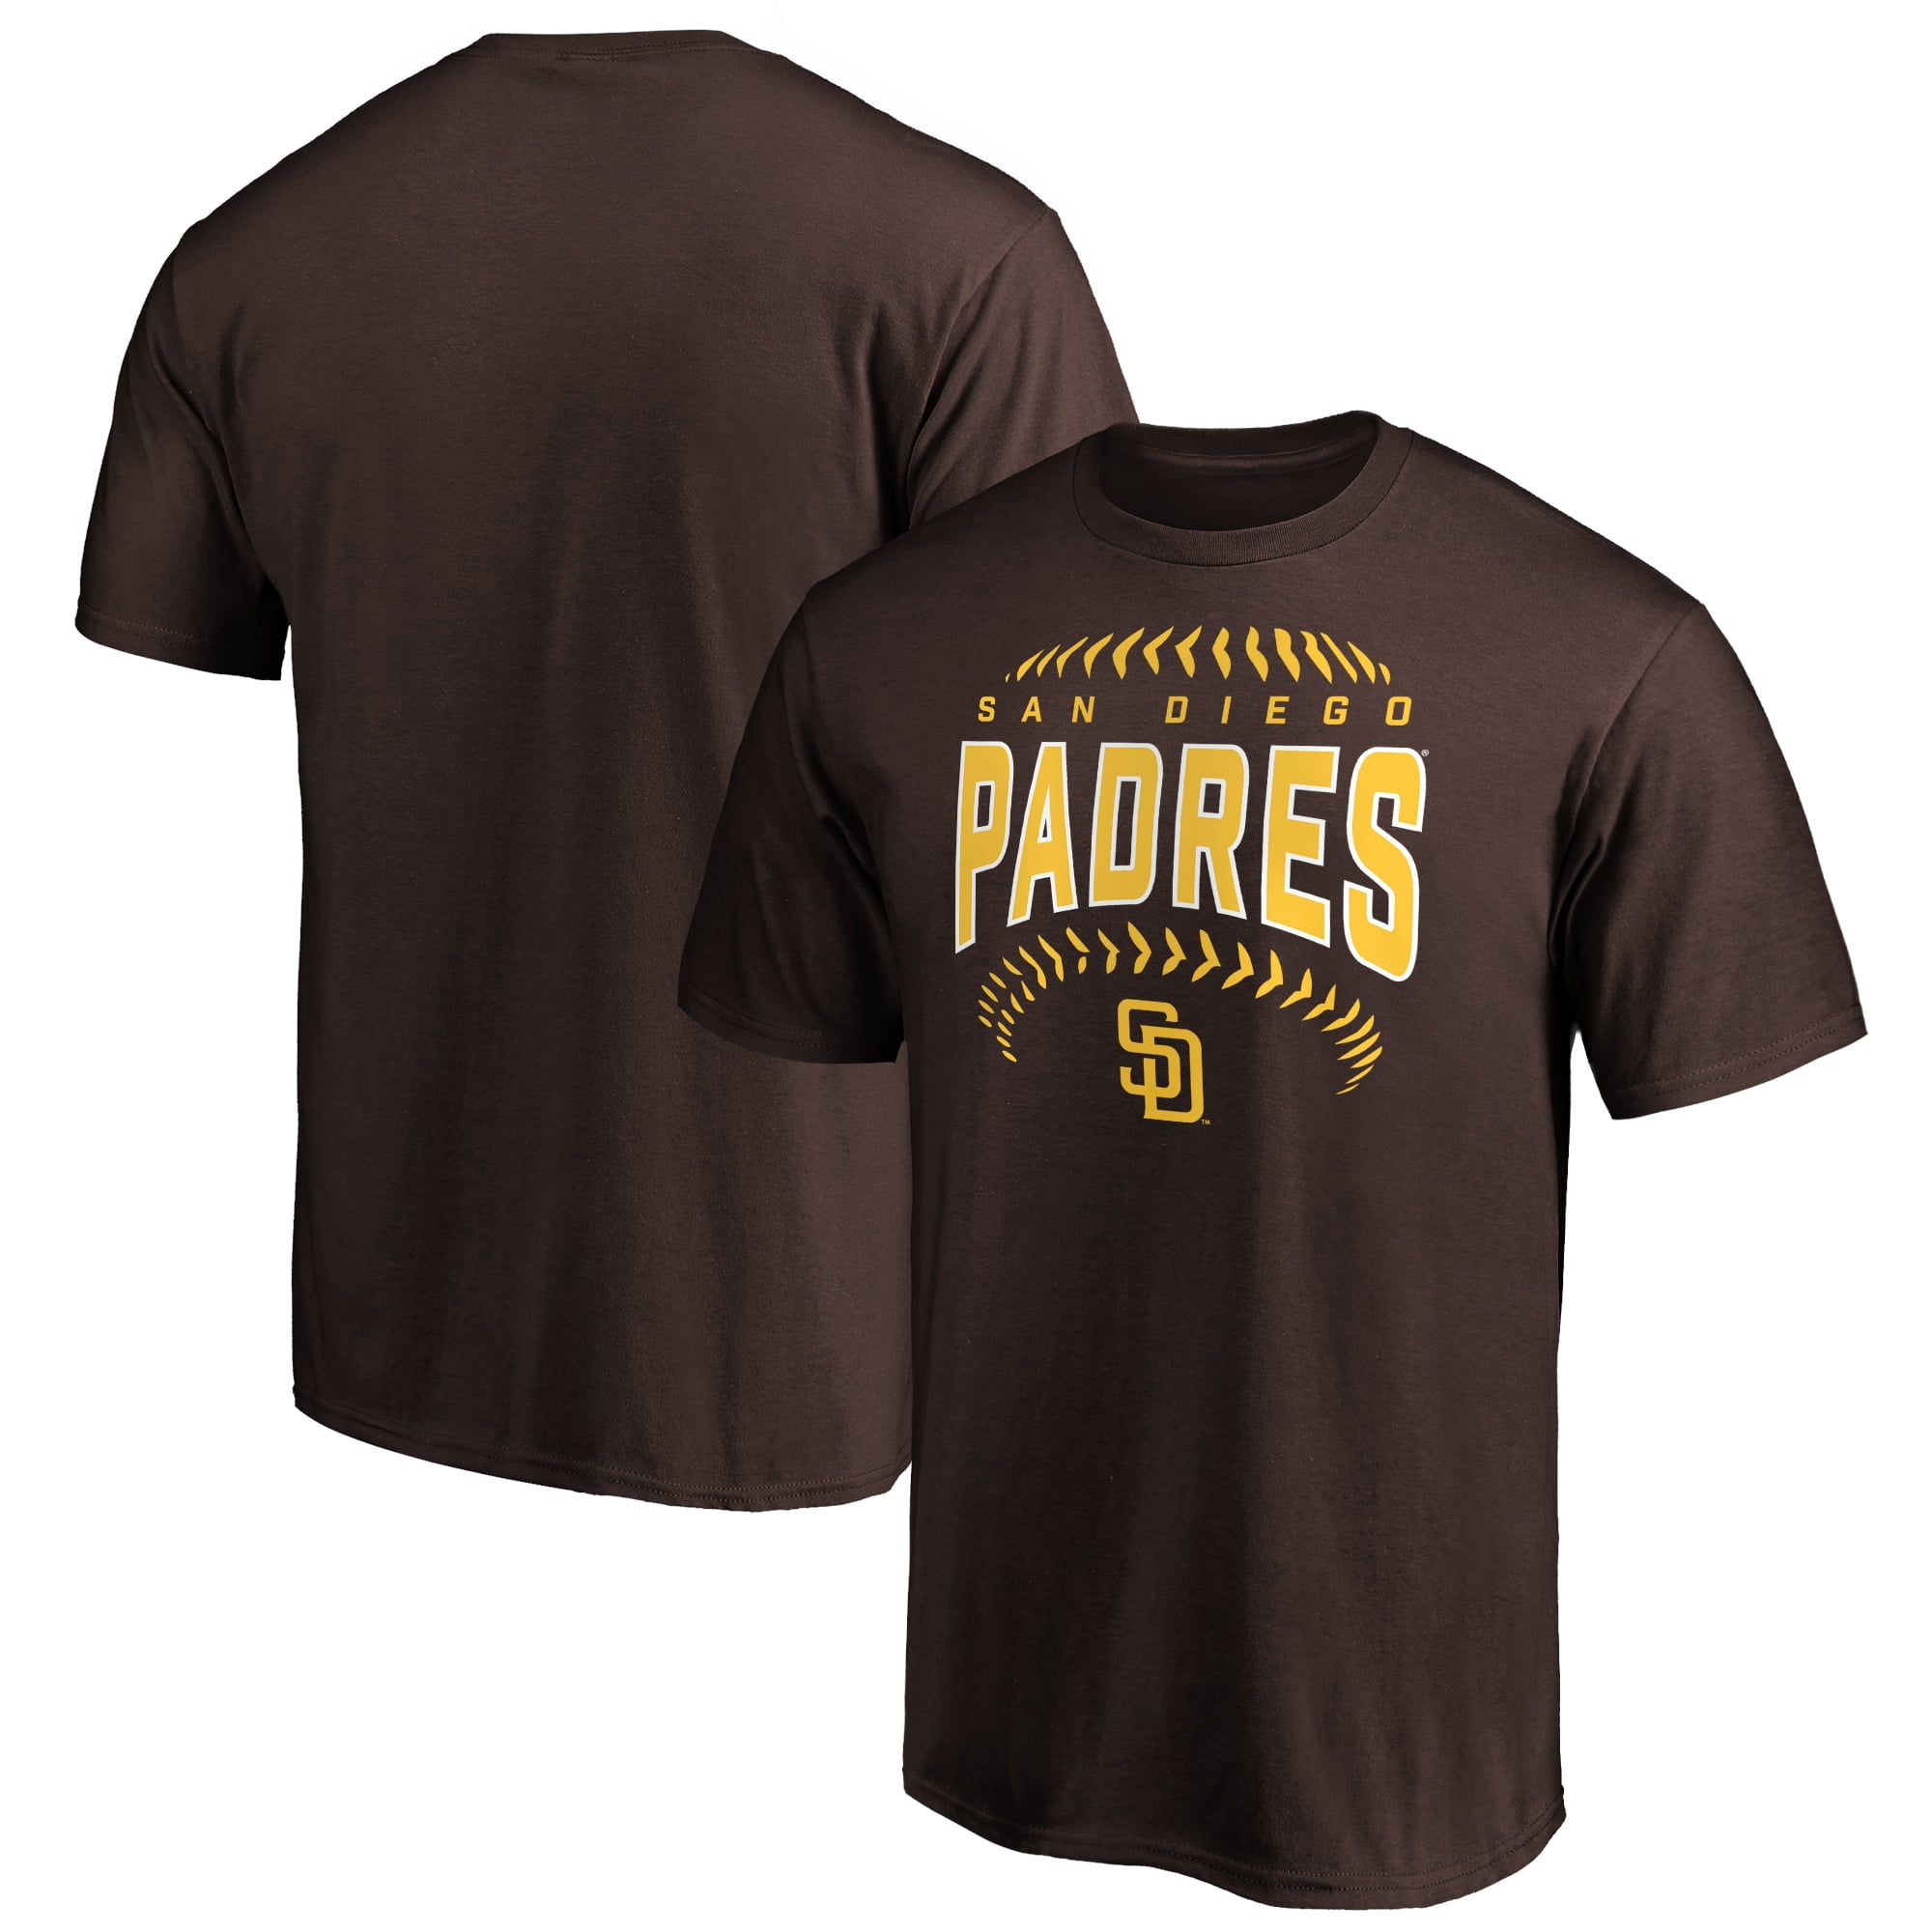 where to buy padres gear